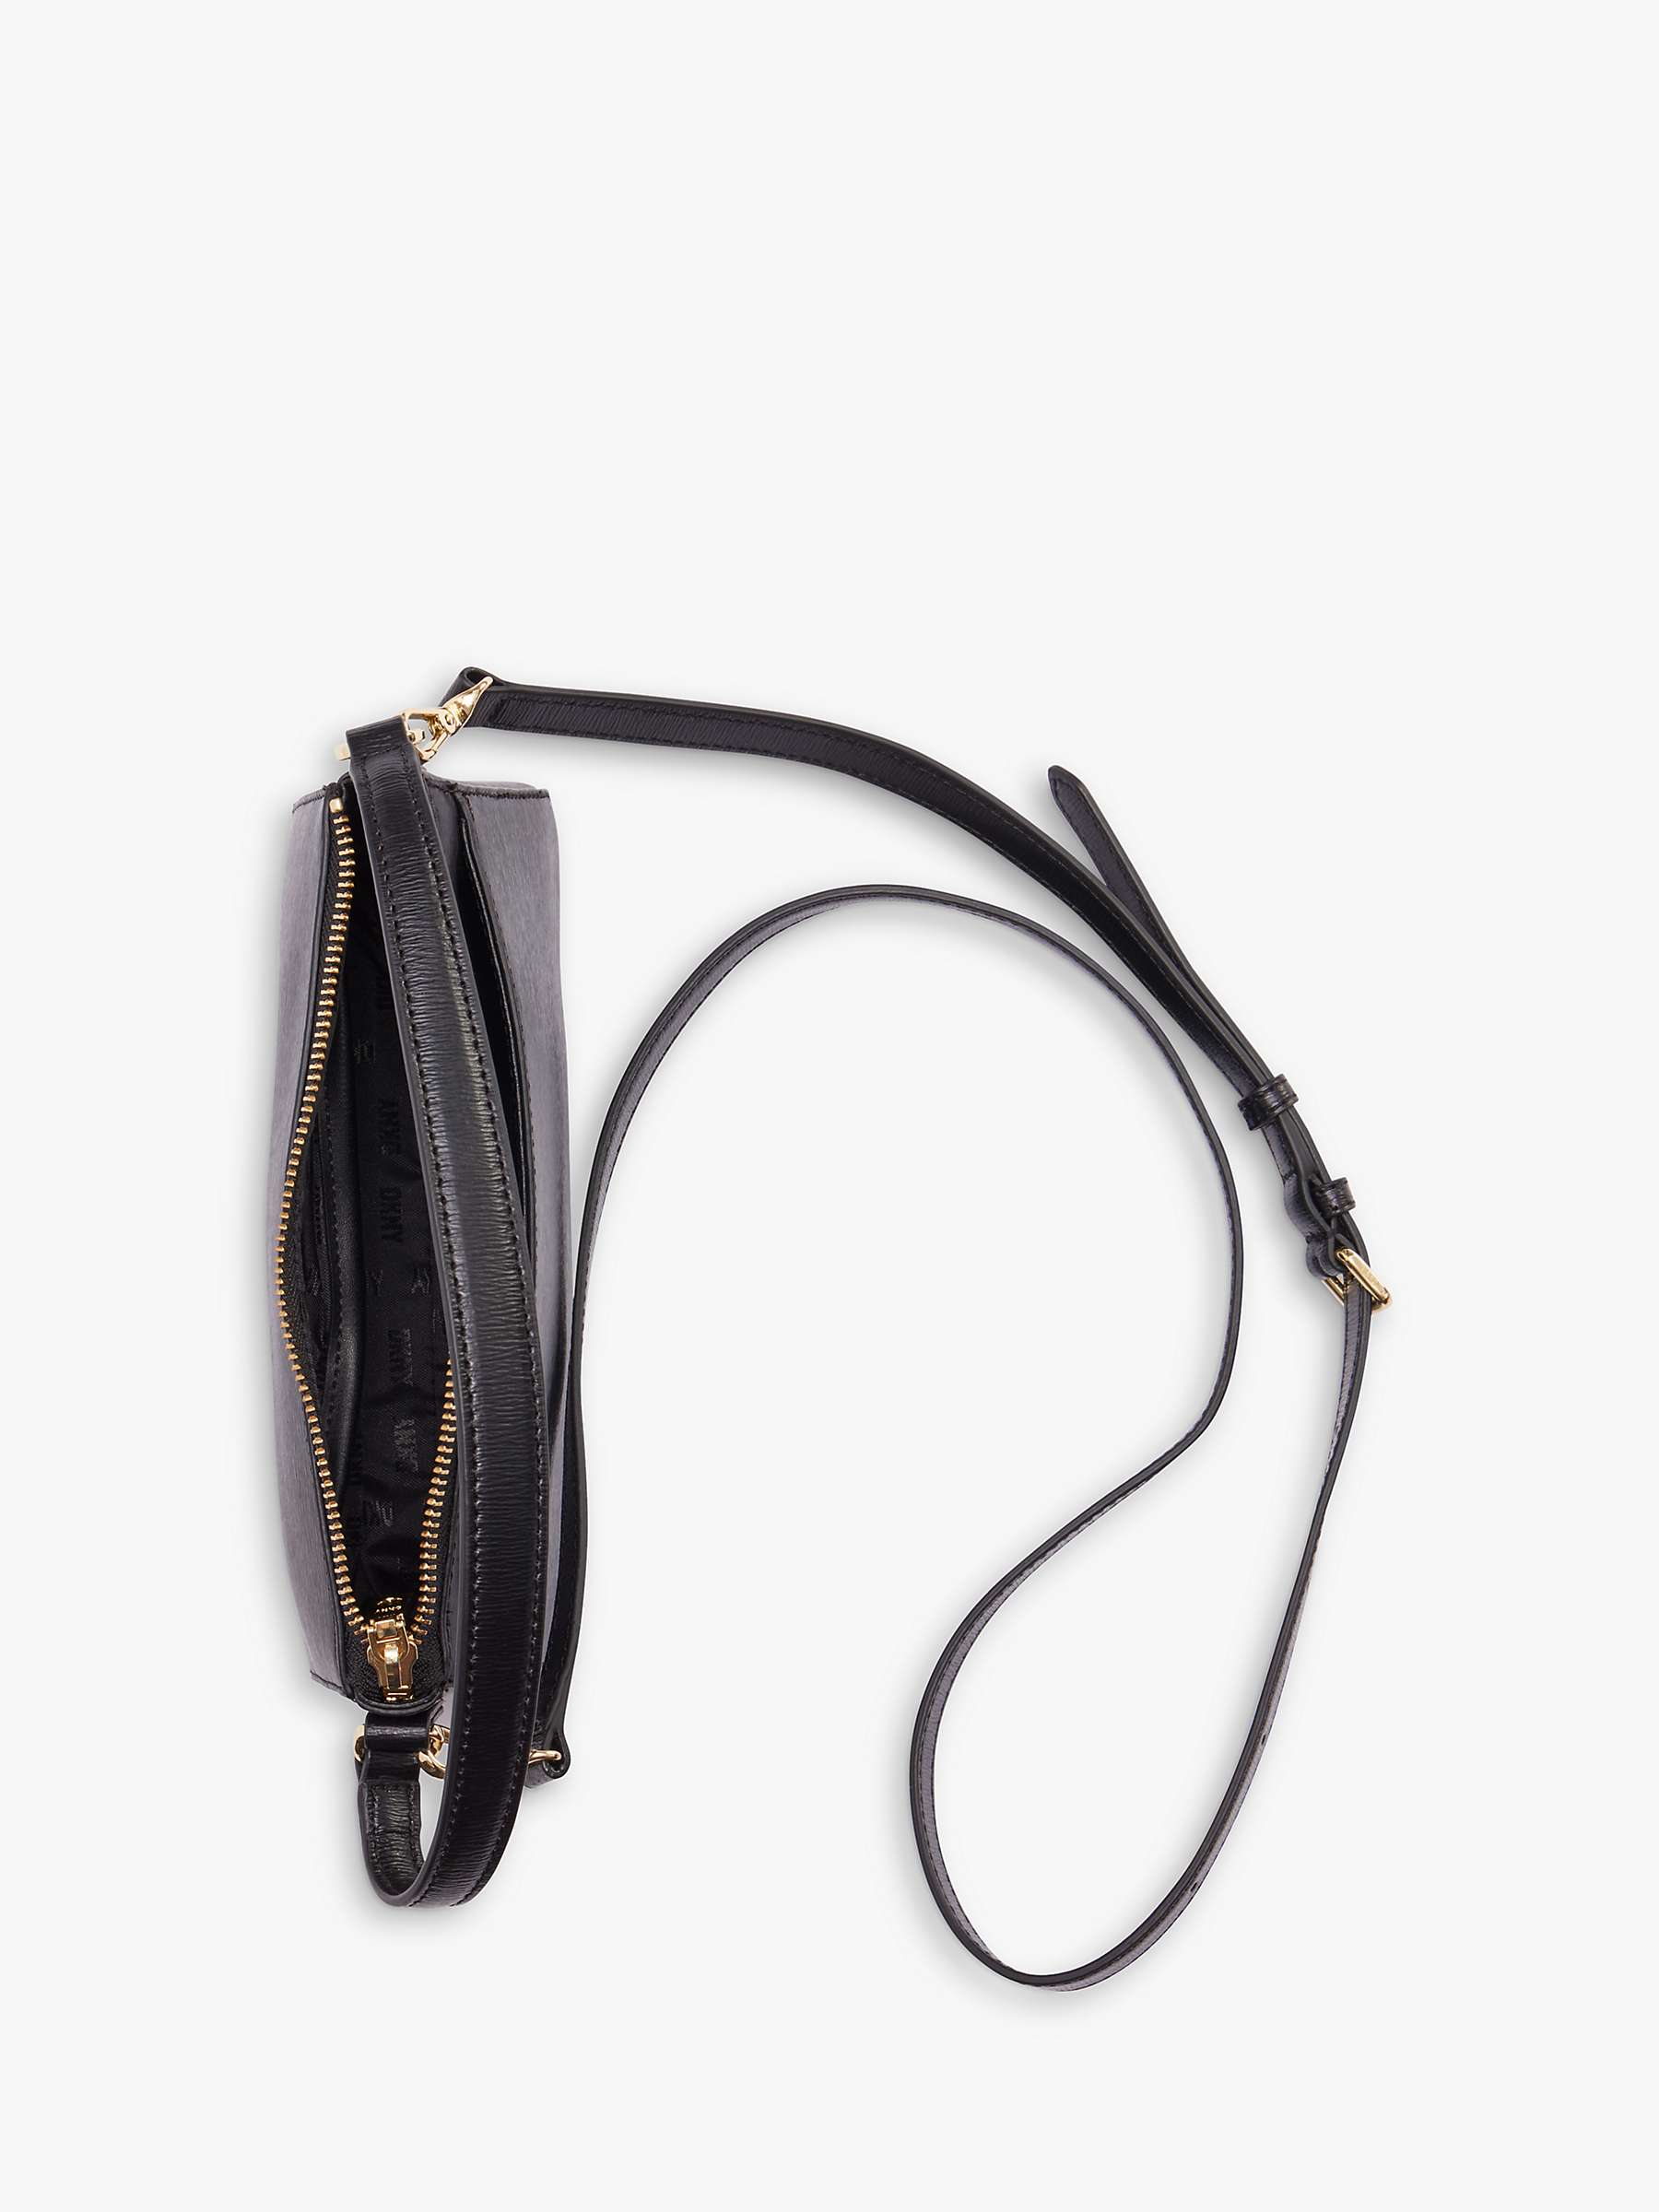 Buy DKNY Bryant Leather Cross Body Bag Online at johnlewis.com